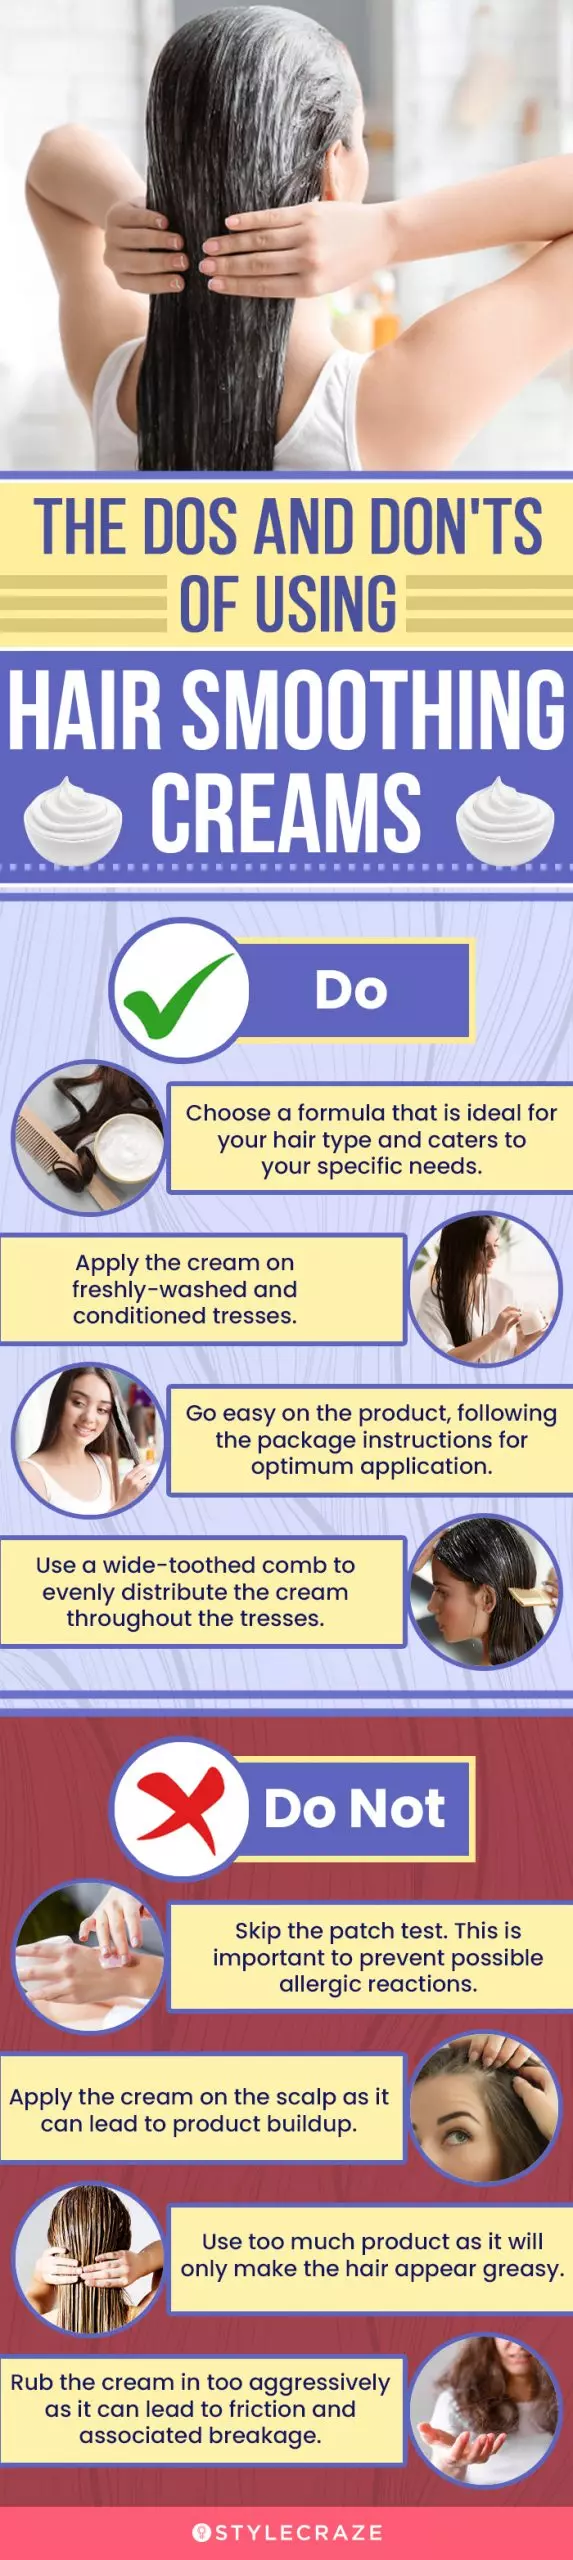 The Dos And Don'ts Of Using Hair Smoothing Creams (infographic)